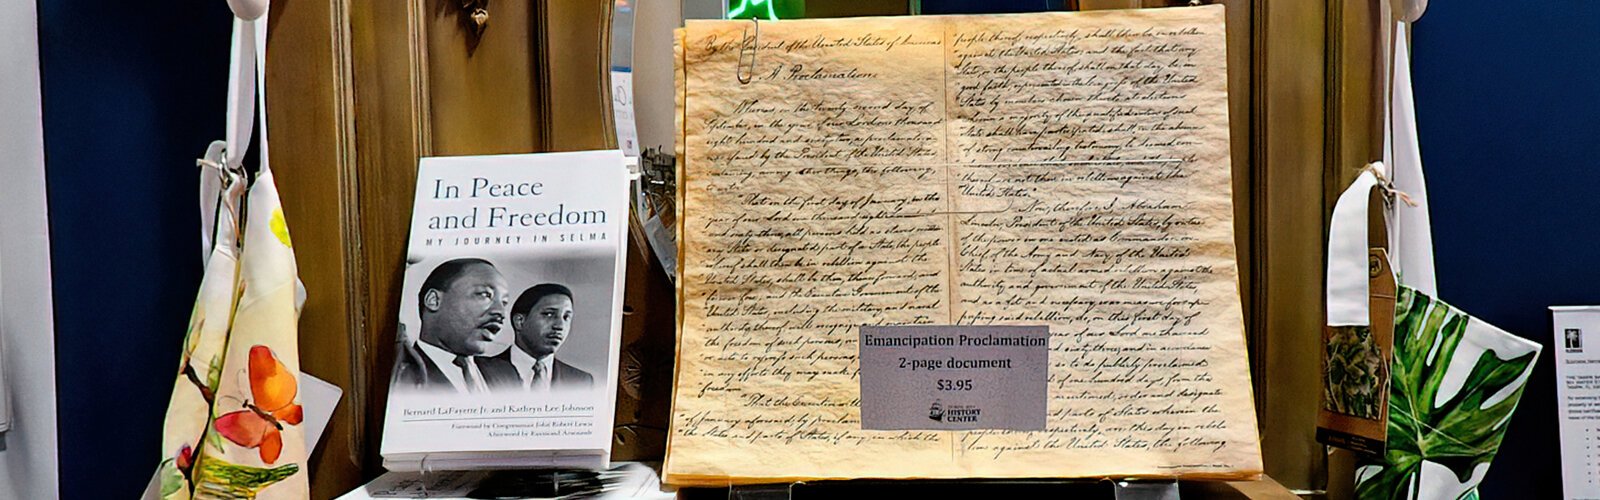 Dr. Bernard LaFayette Jr.’s book, “In Peace and Freedom: My Journey in Selma,” and replicas of the Emancipation Proclamation are available for purchase at TBHC’s museum store.